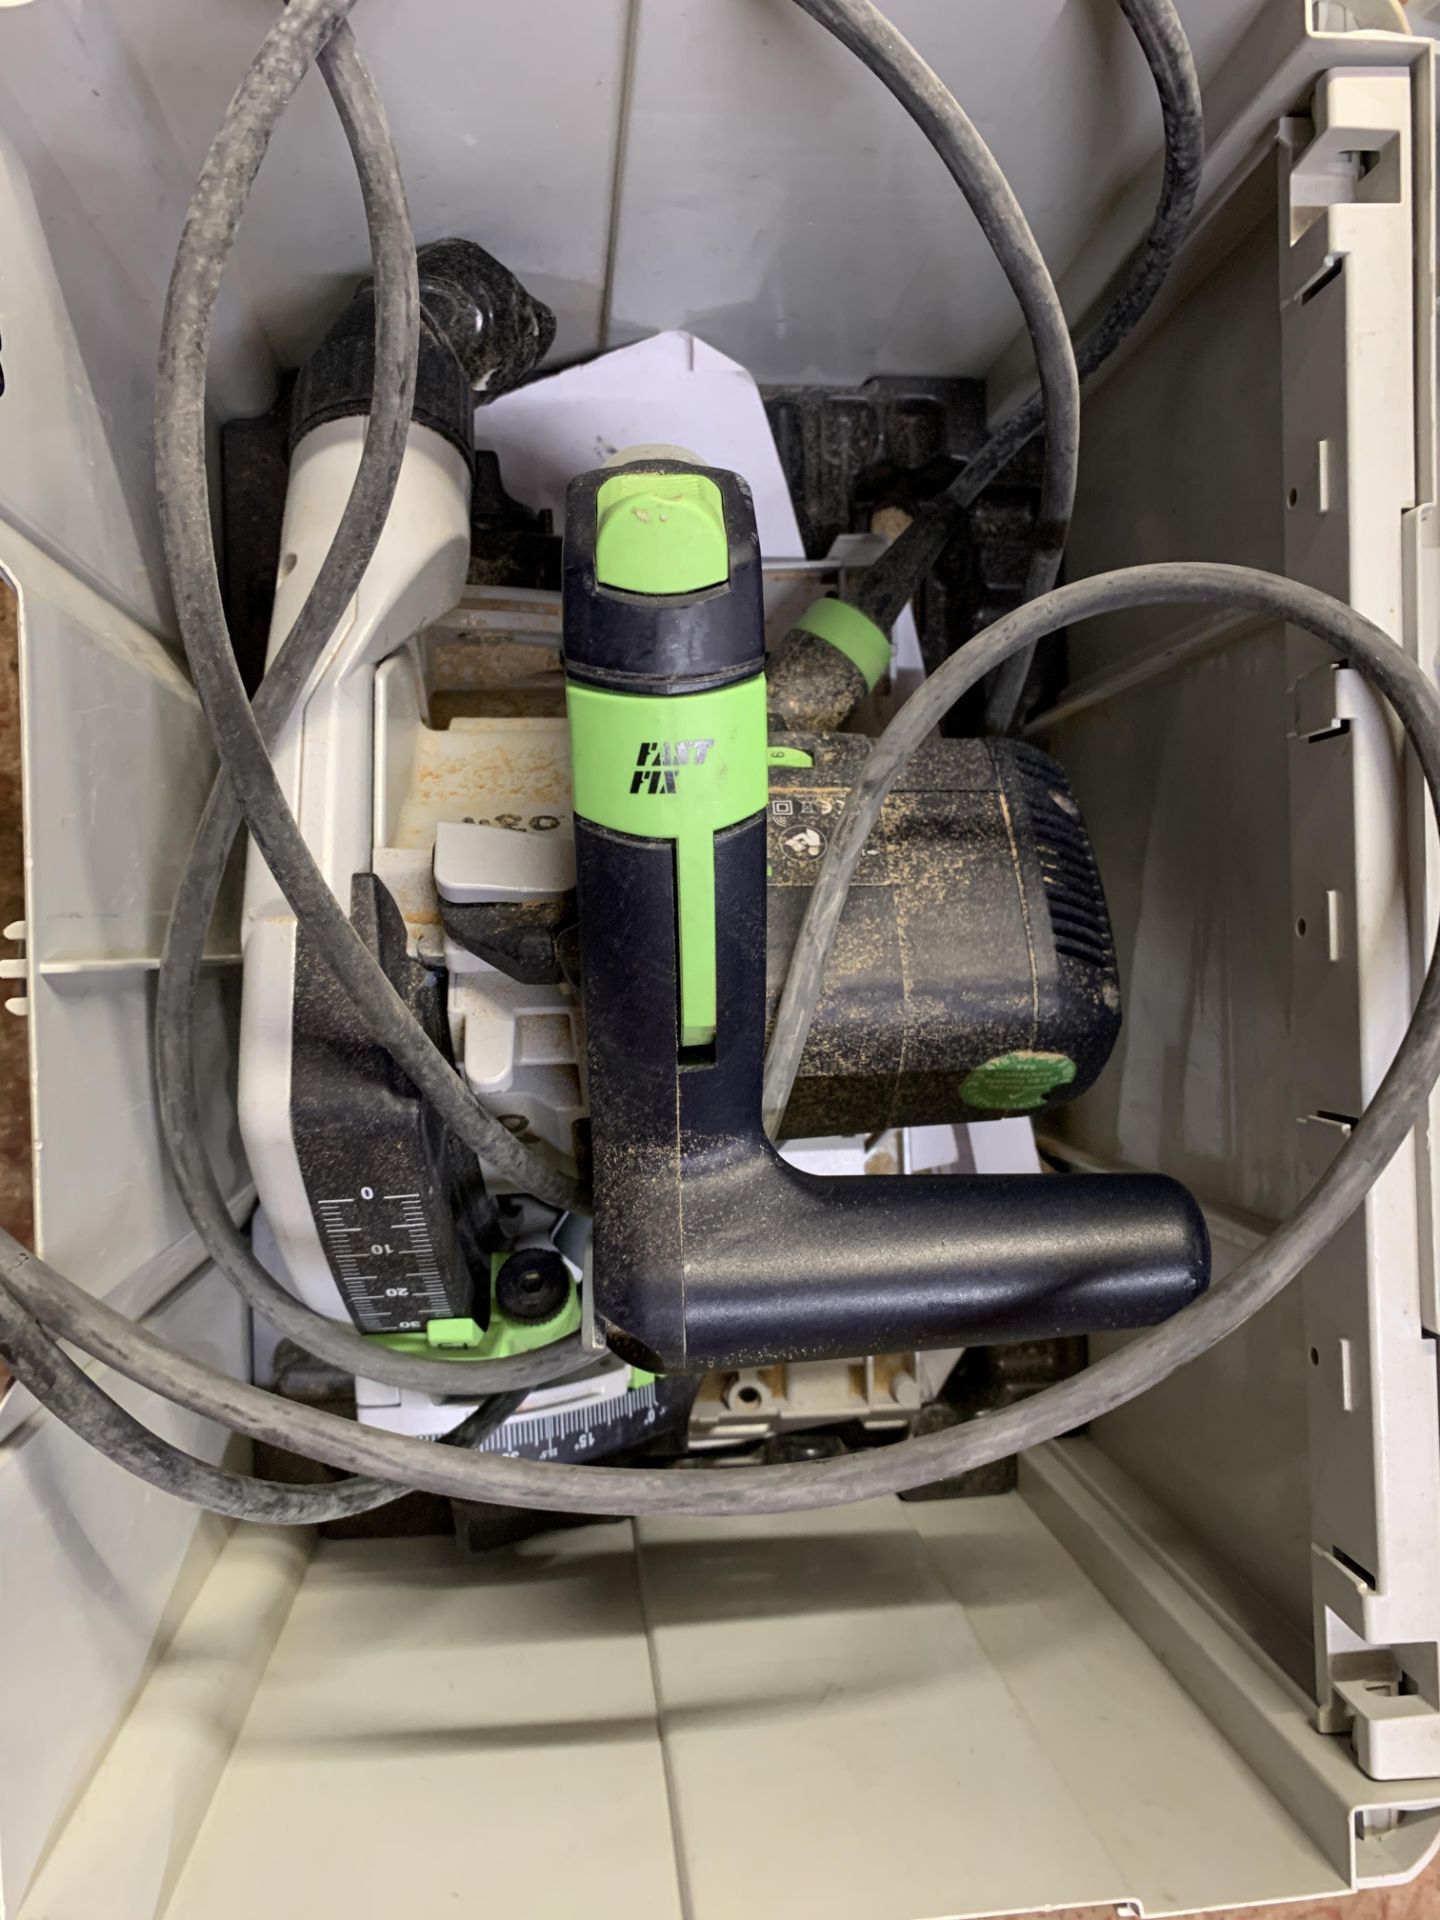 Festool TS55 Plunge Saw - 110V in Carry Case - Image 2 of 2